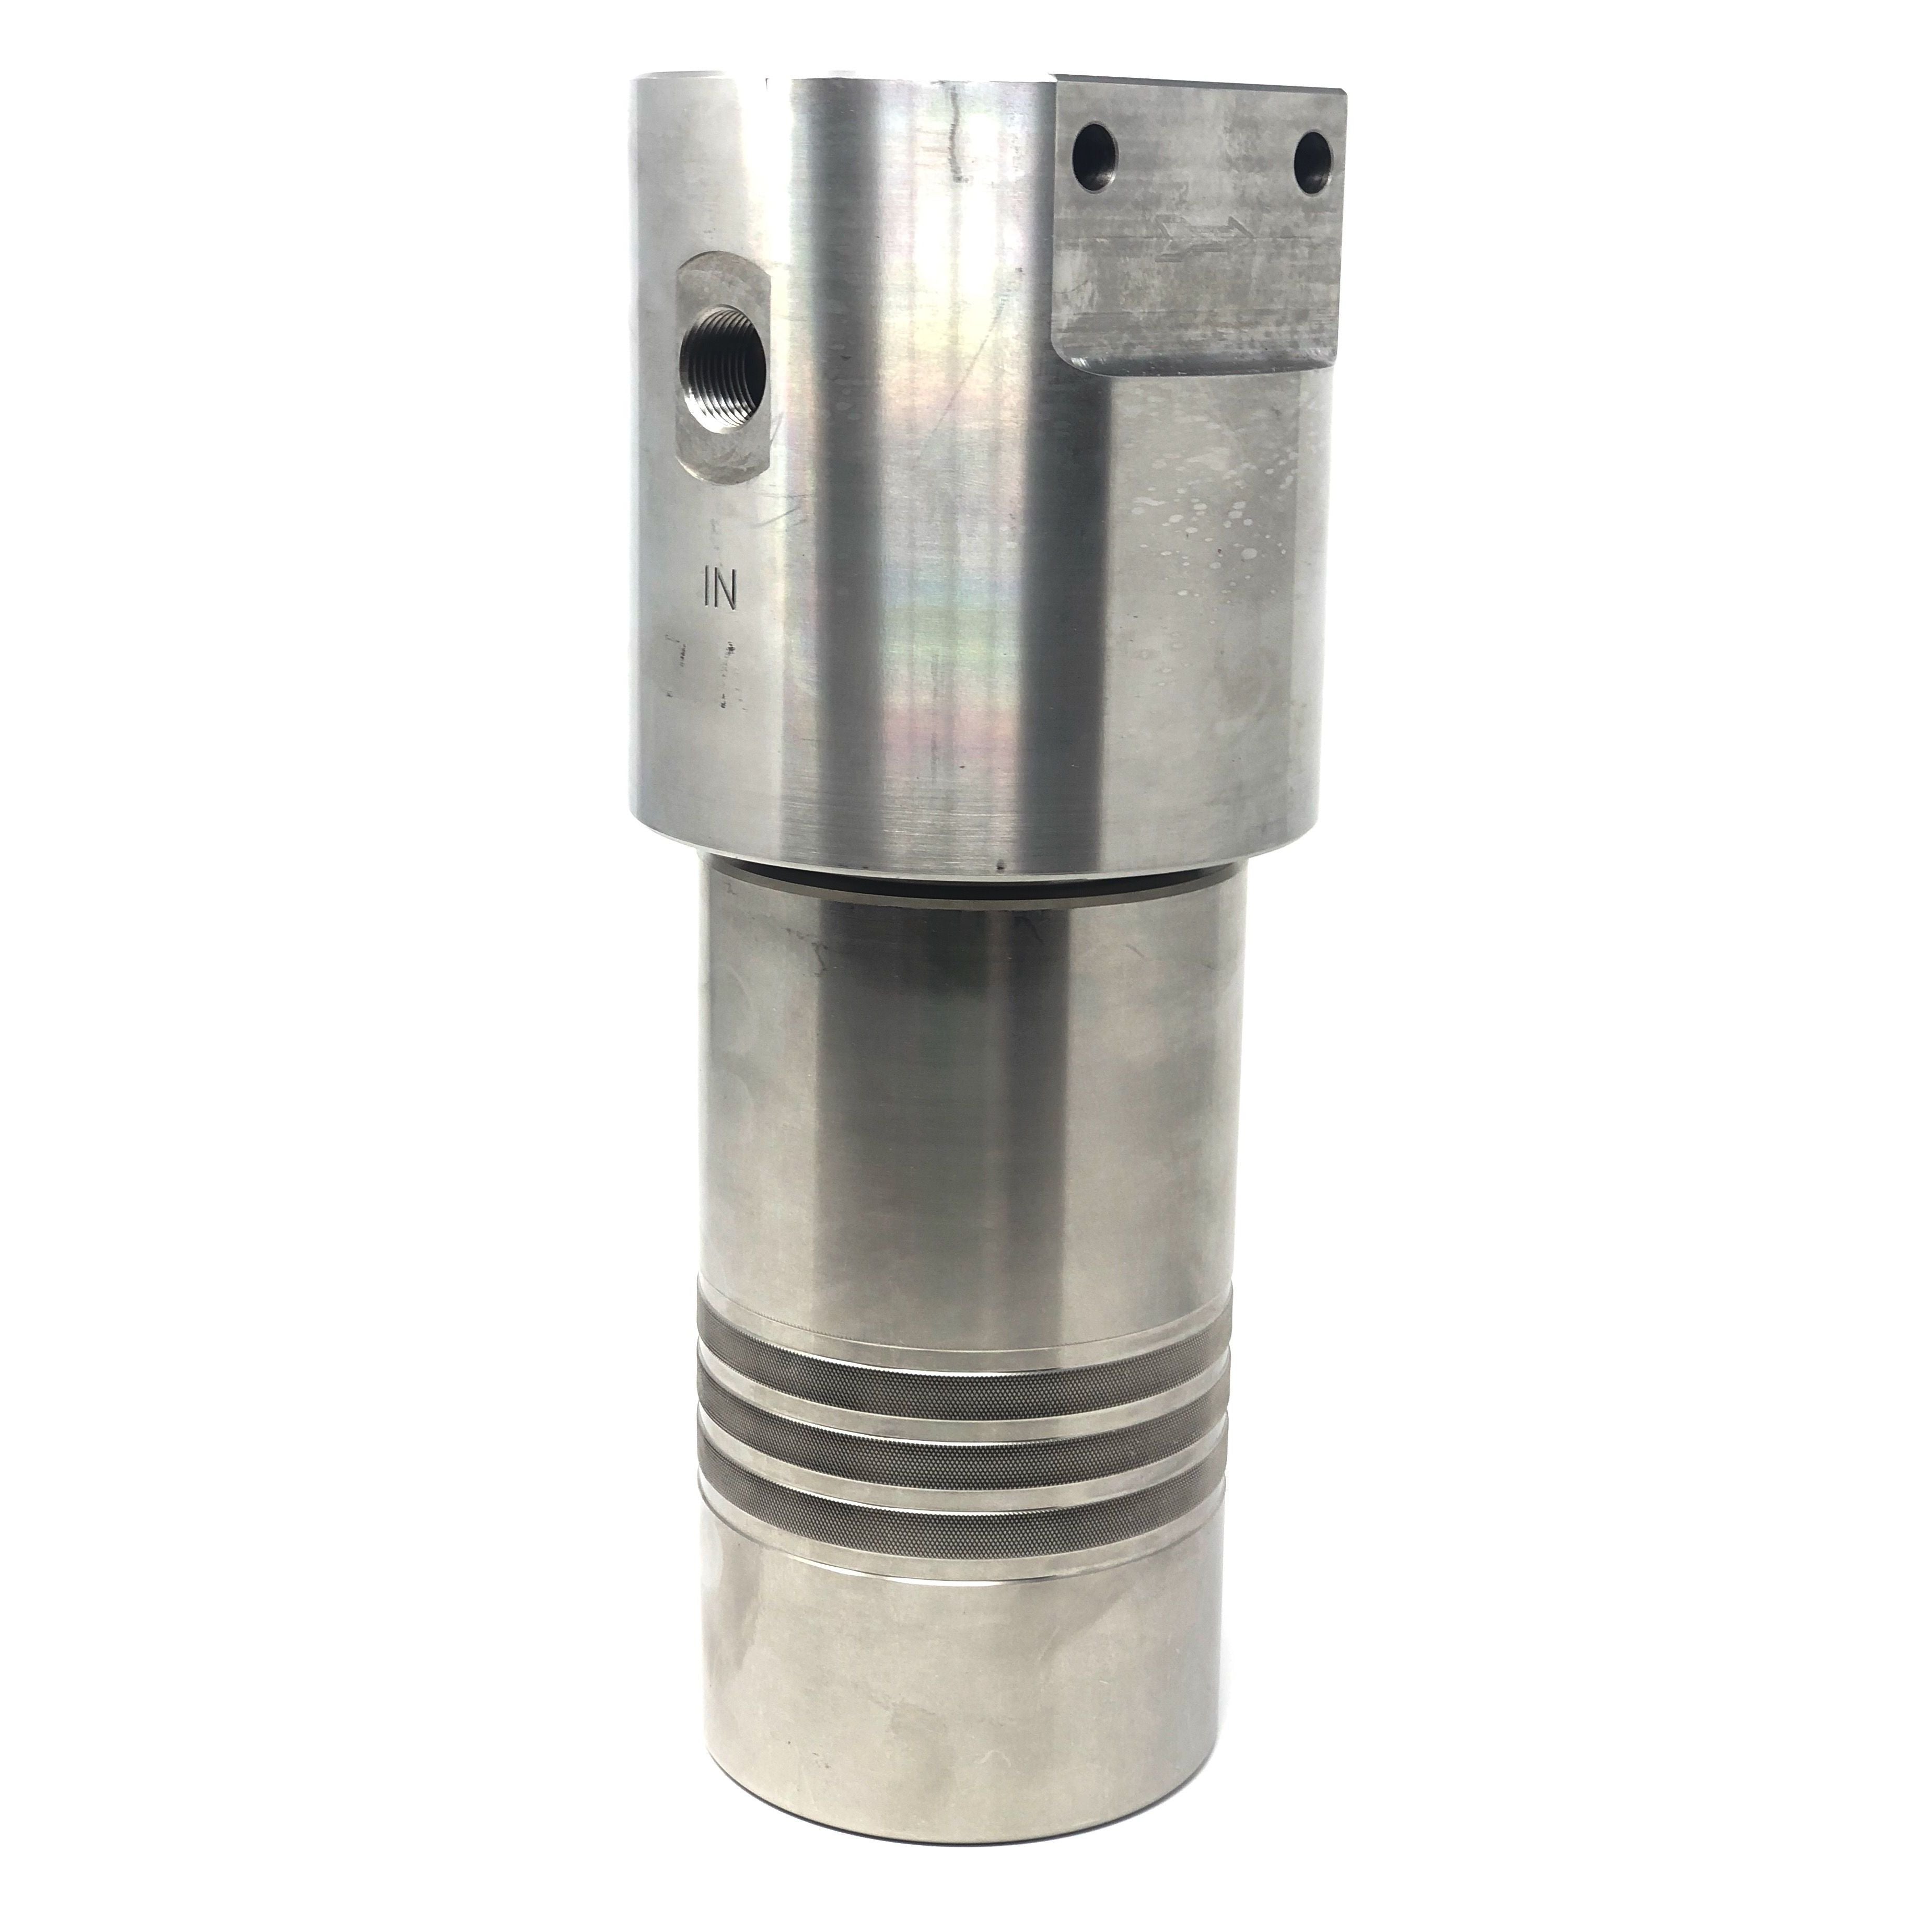 52S-2412N-100SEN : Chase Ultra High Pressure Inline Filter, 10000psi, 3/4" NPT, 100 Micron, With Visual Indicator, No Bypass